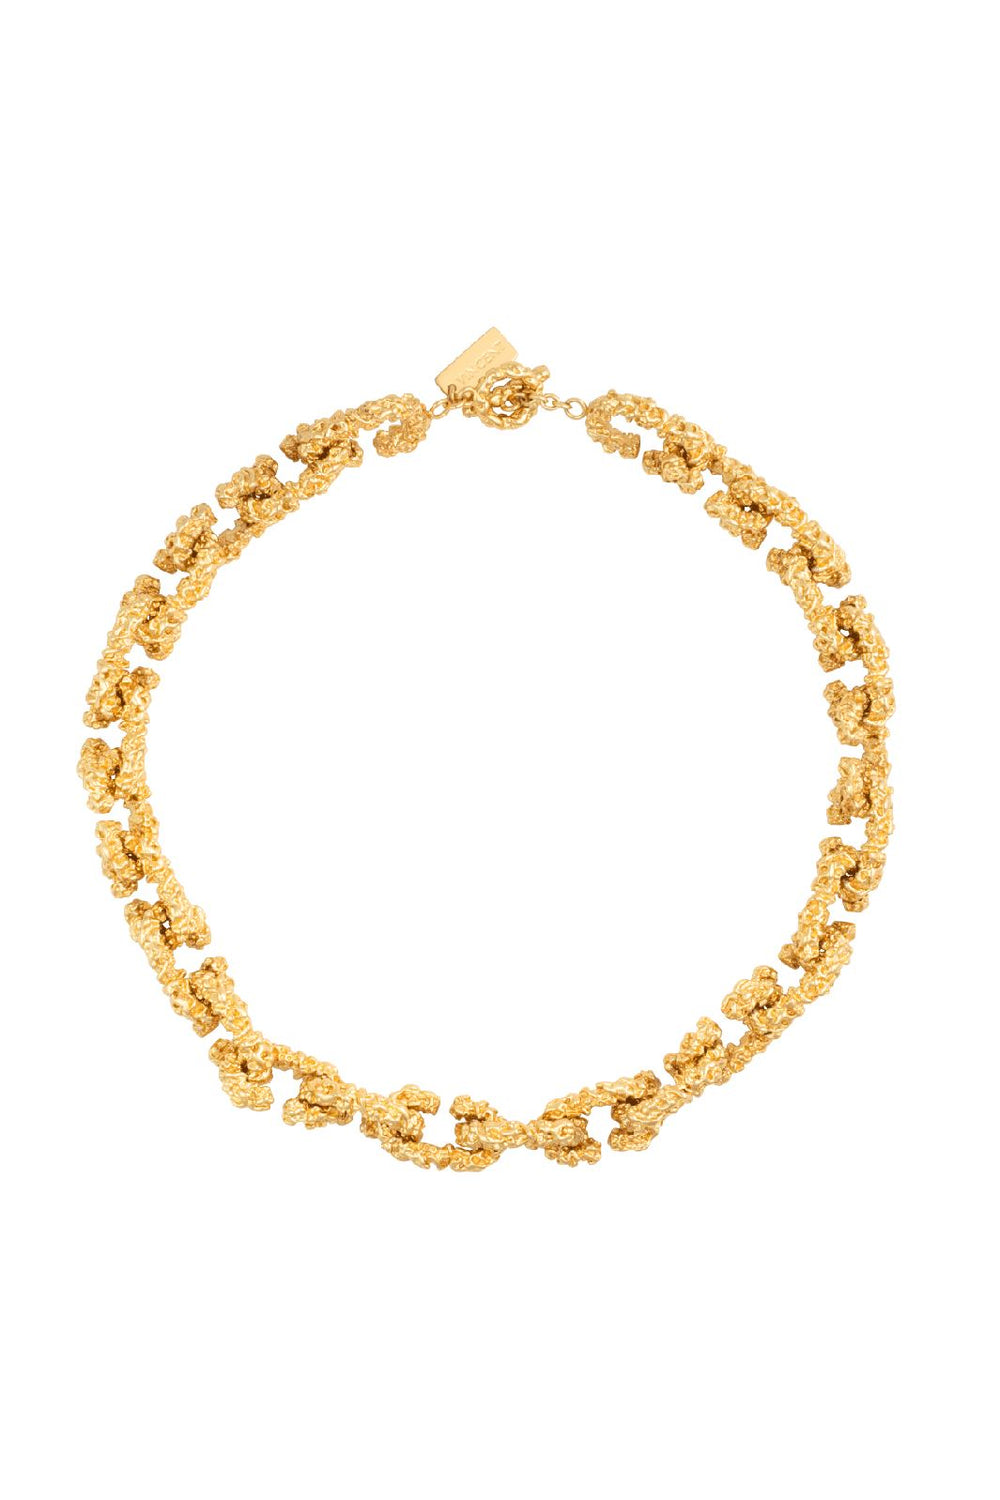 House Of Vincent - Chain Of Riddle Necklace - Gilded